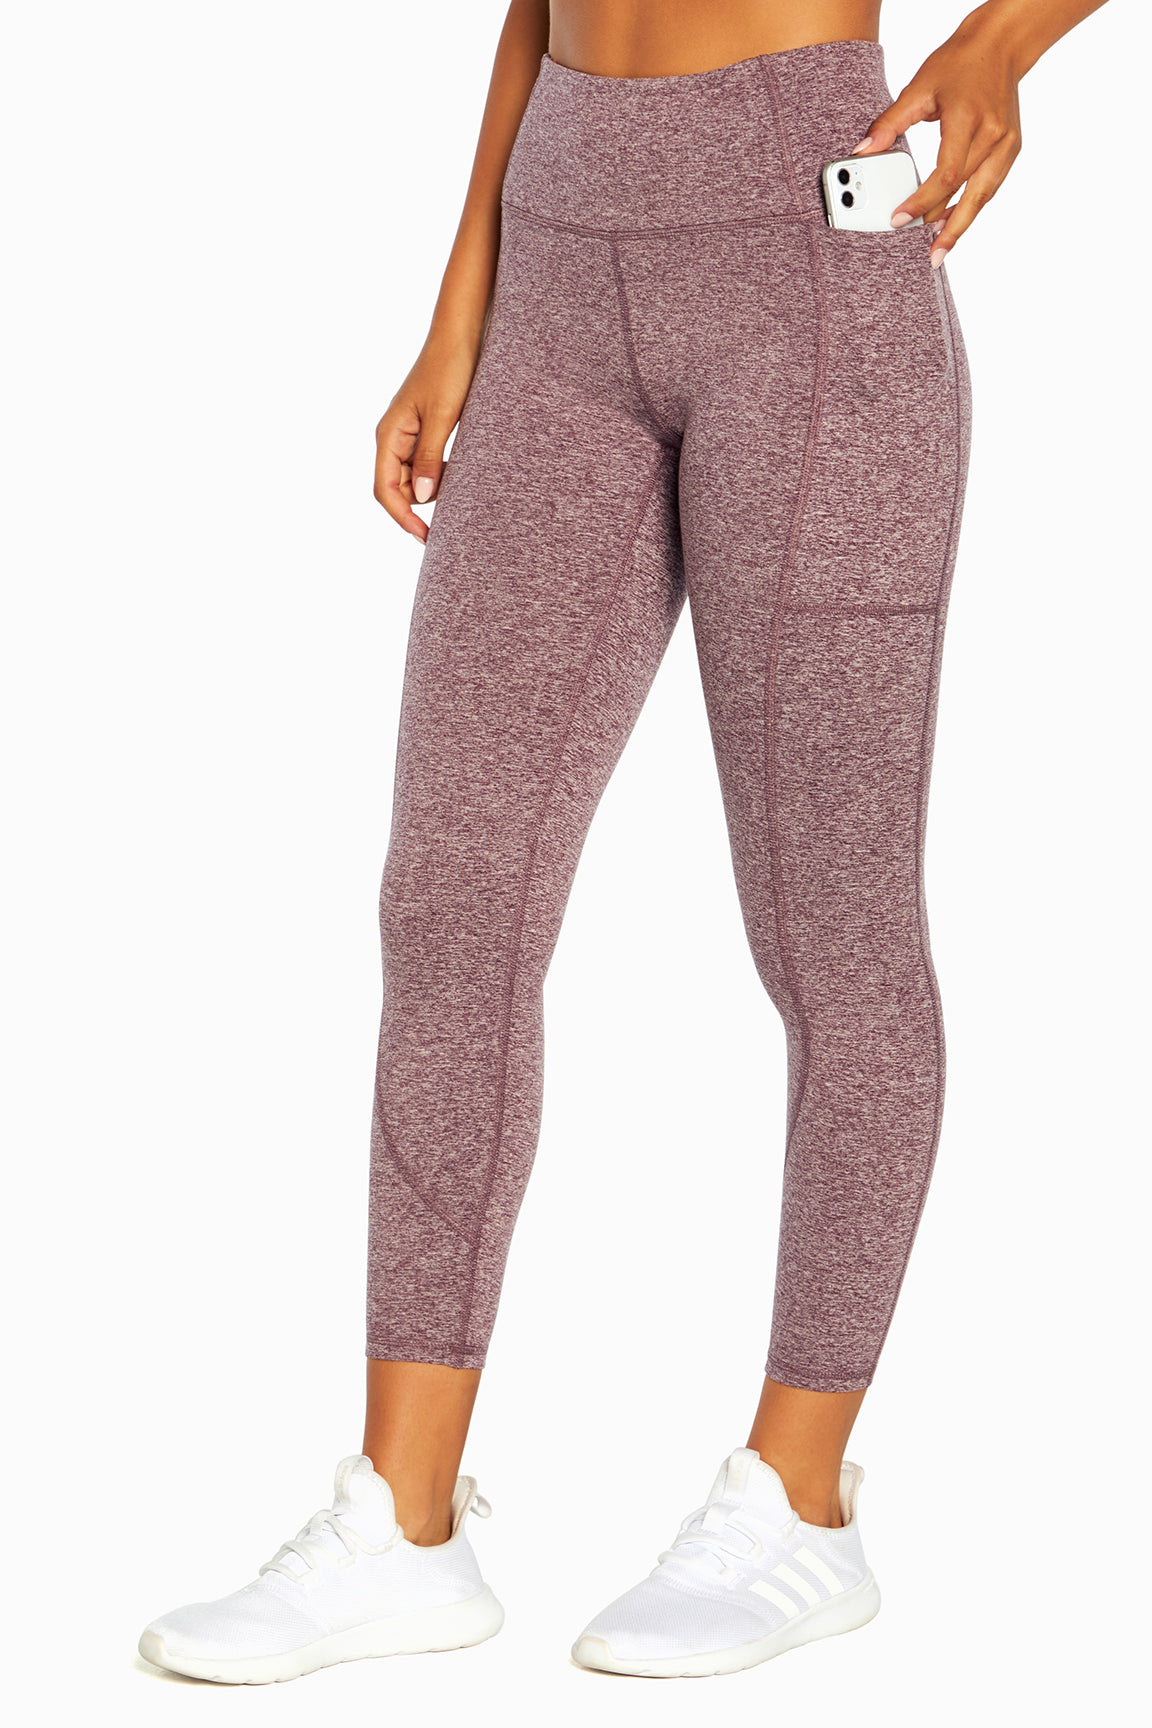 Balance Collection Stretch Athletic Leggings for Women